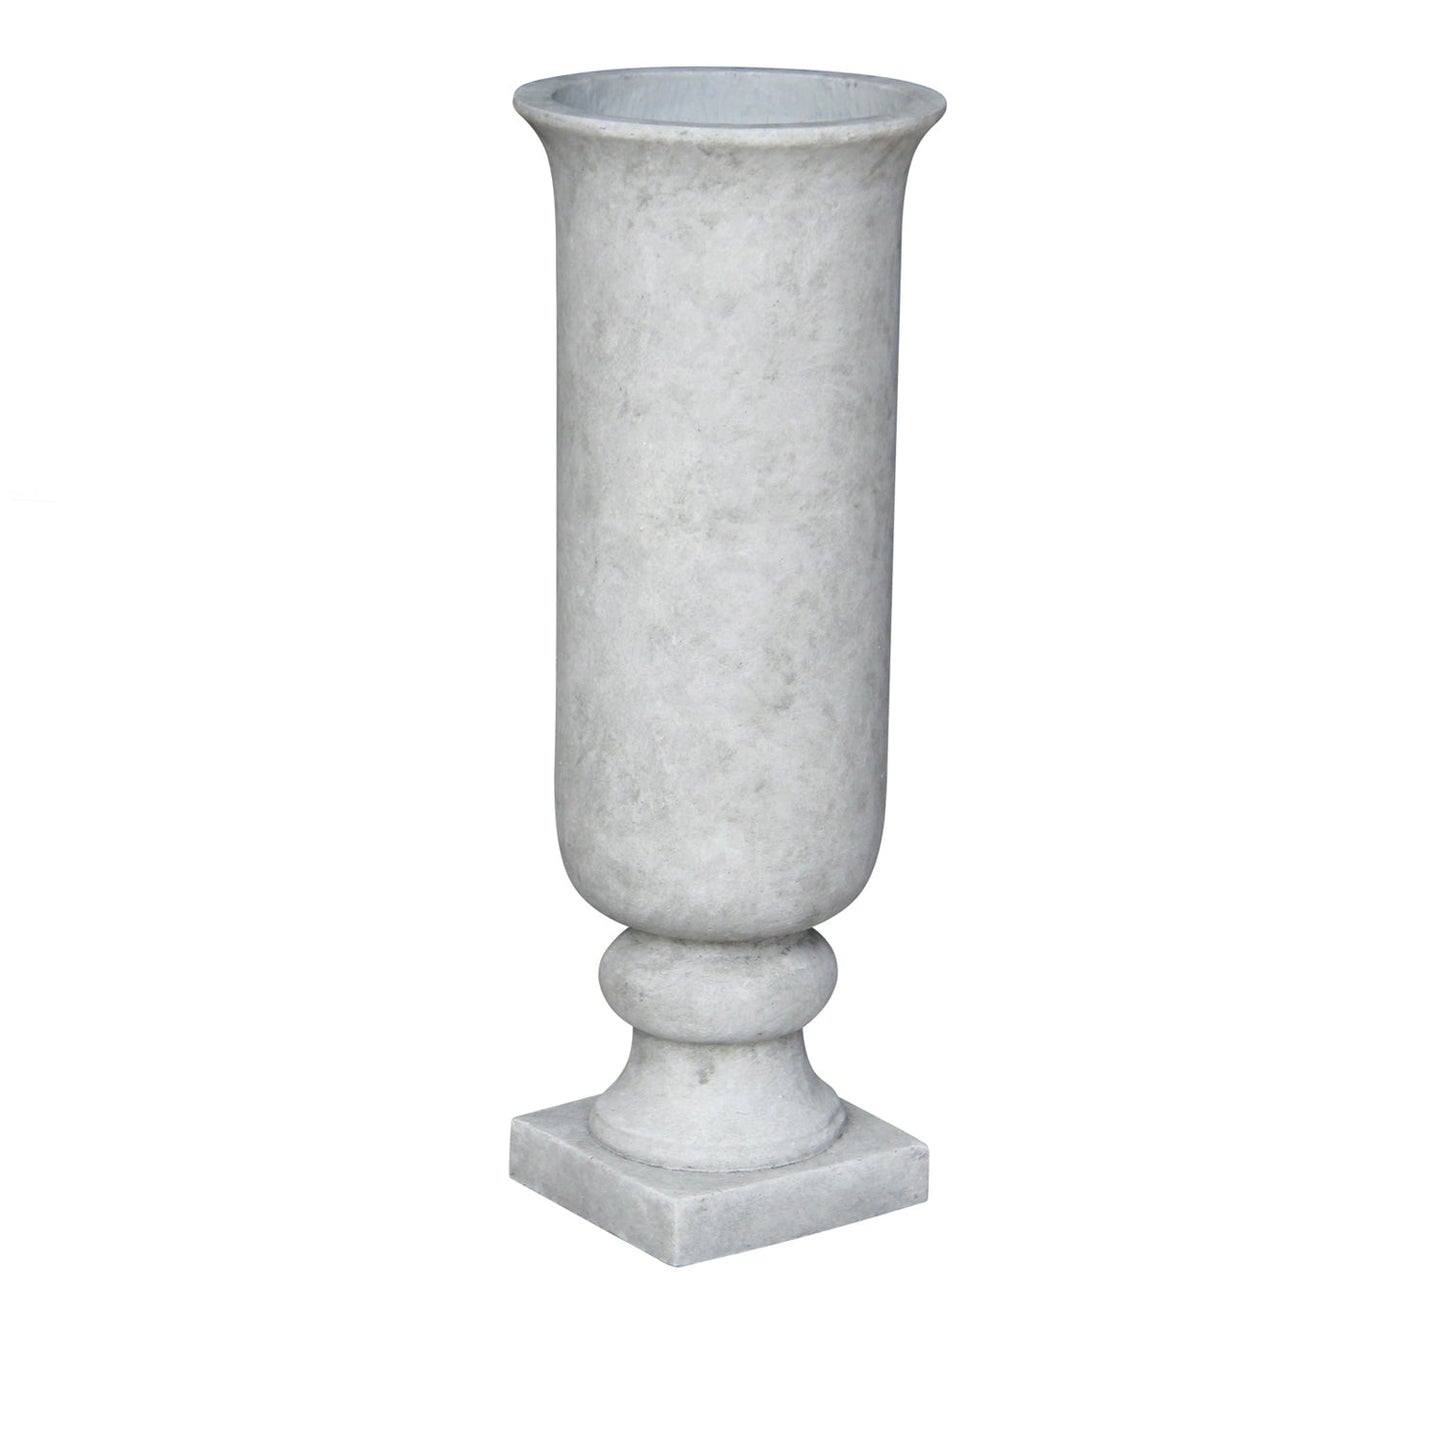 Crestview Collection Interlude 11" x 11" x 30" Traditional Concrete Large Vase In Light Stone Finish